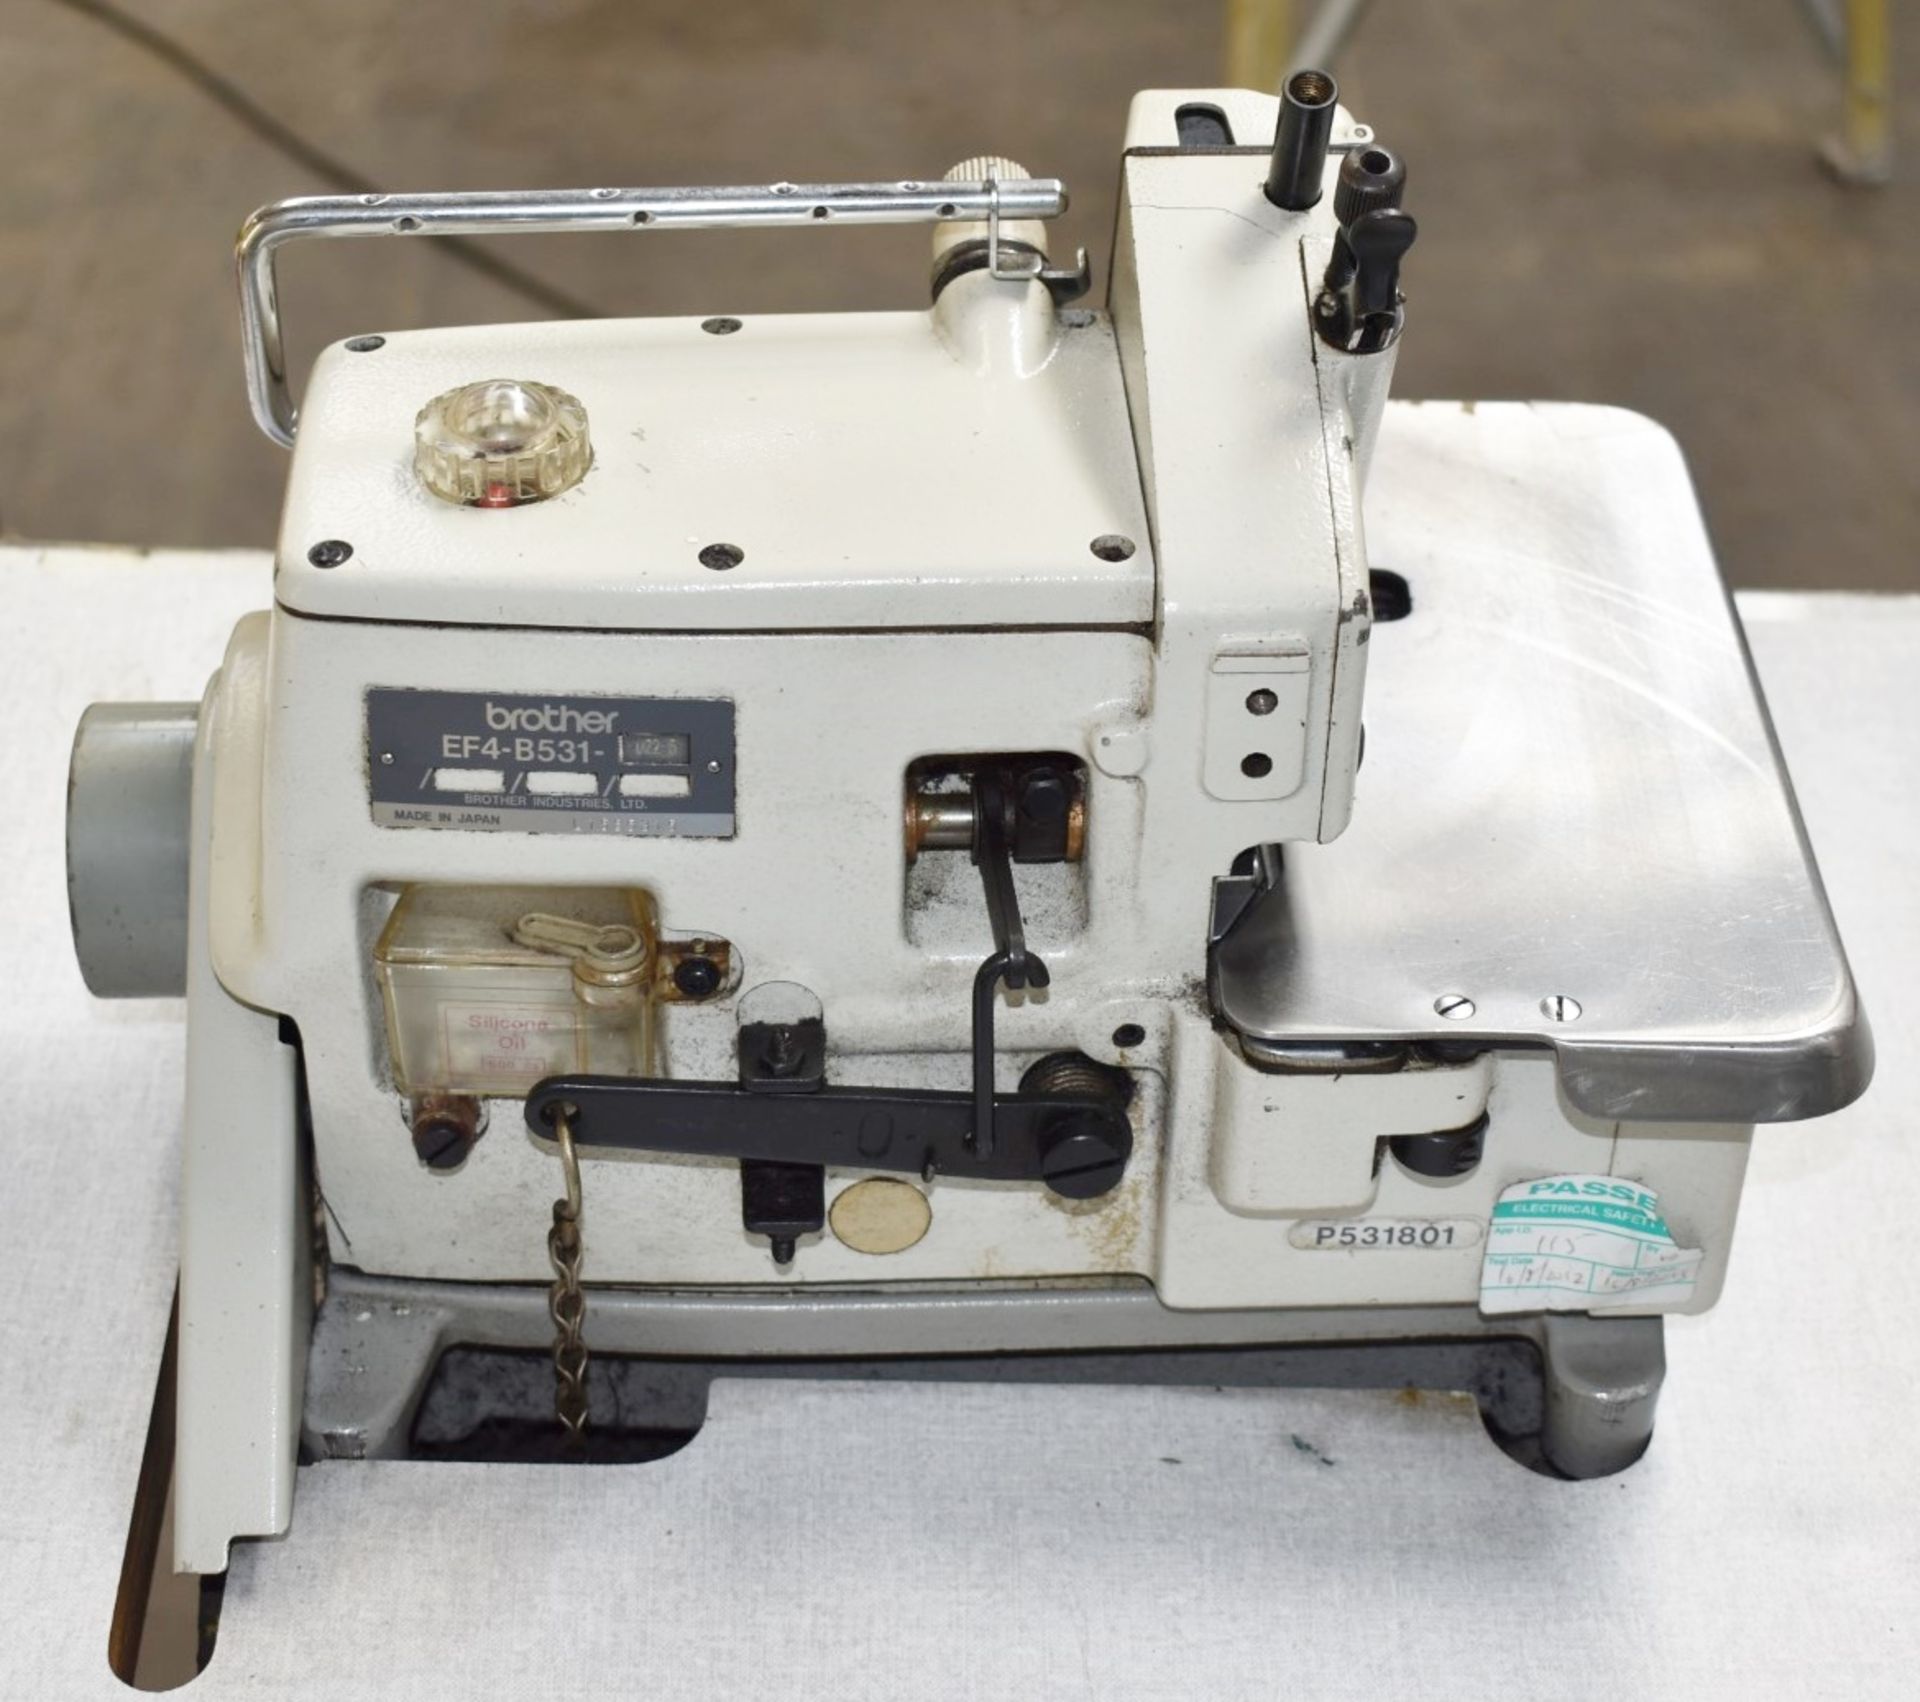 1 x Brother Overlock Industrial Sewing Machine - Model EF4-B531 - Image 18 of 27